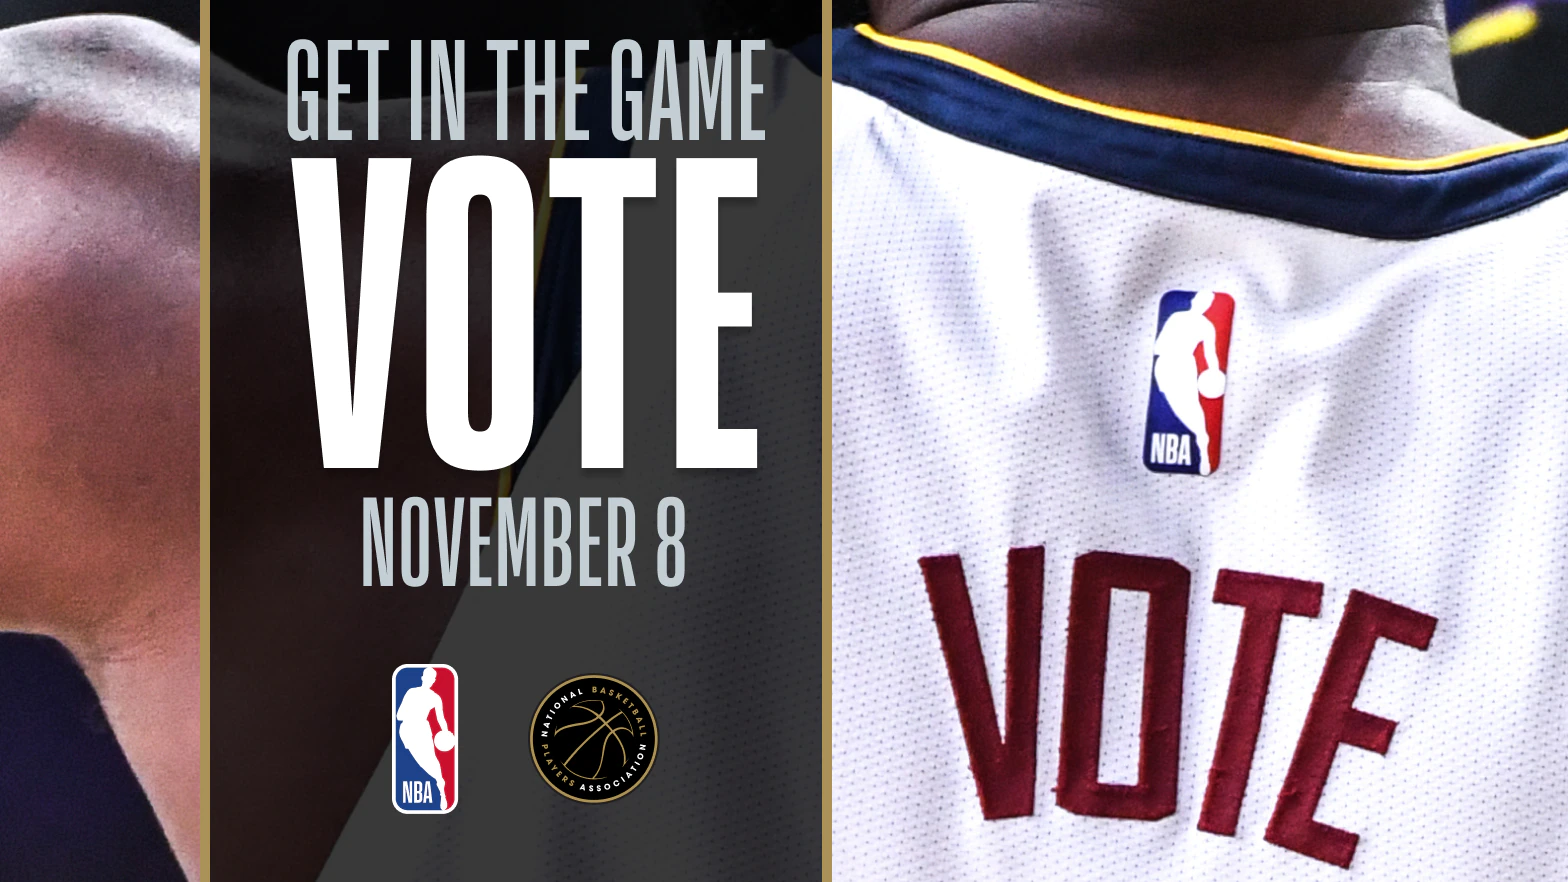 NBA says, “Get in the game. Vote!!!”